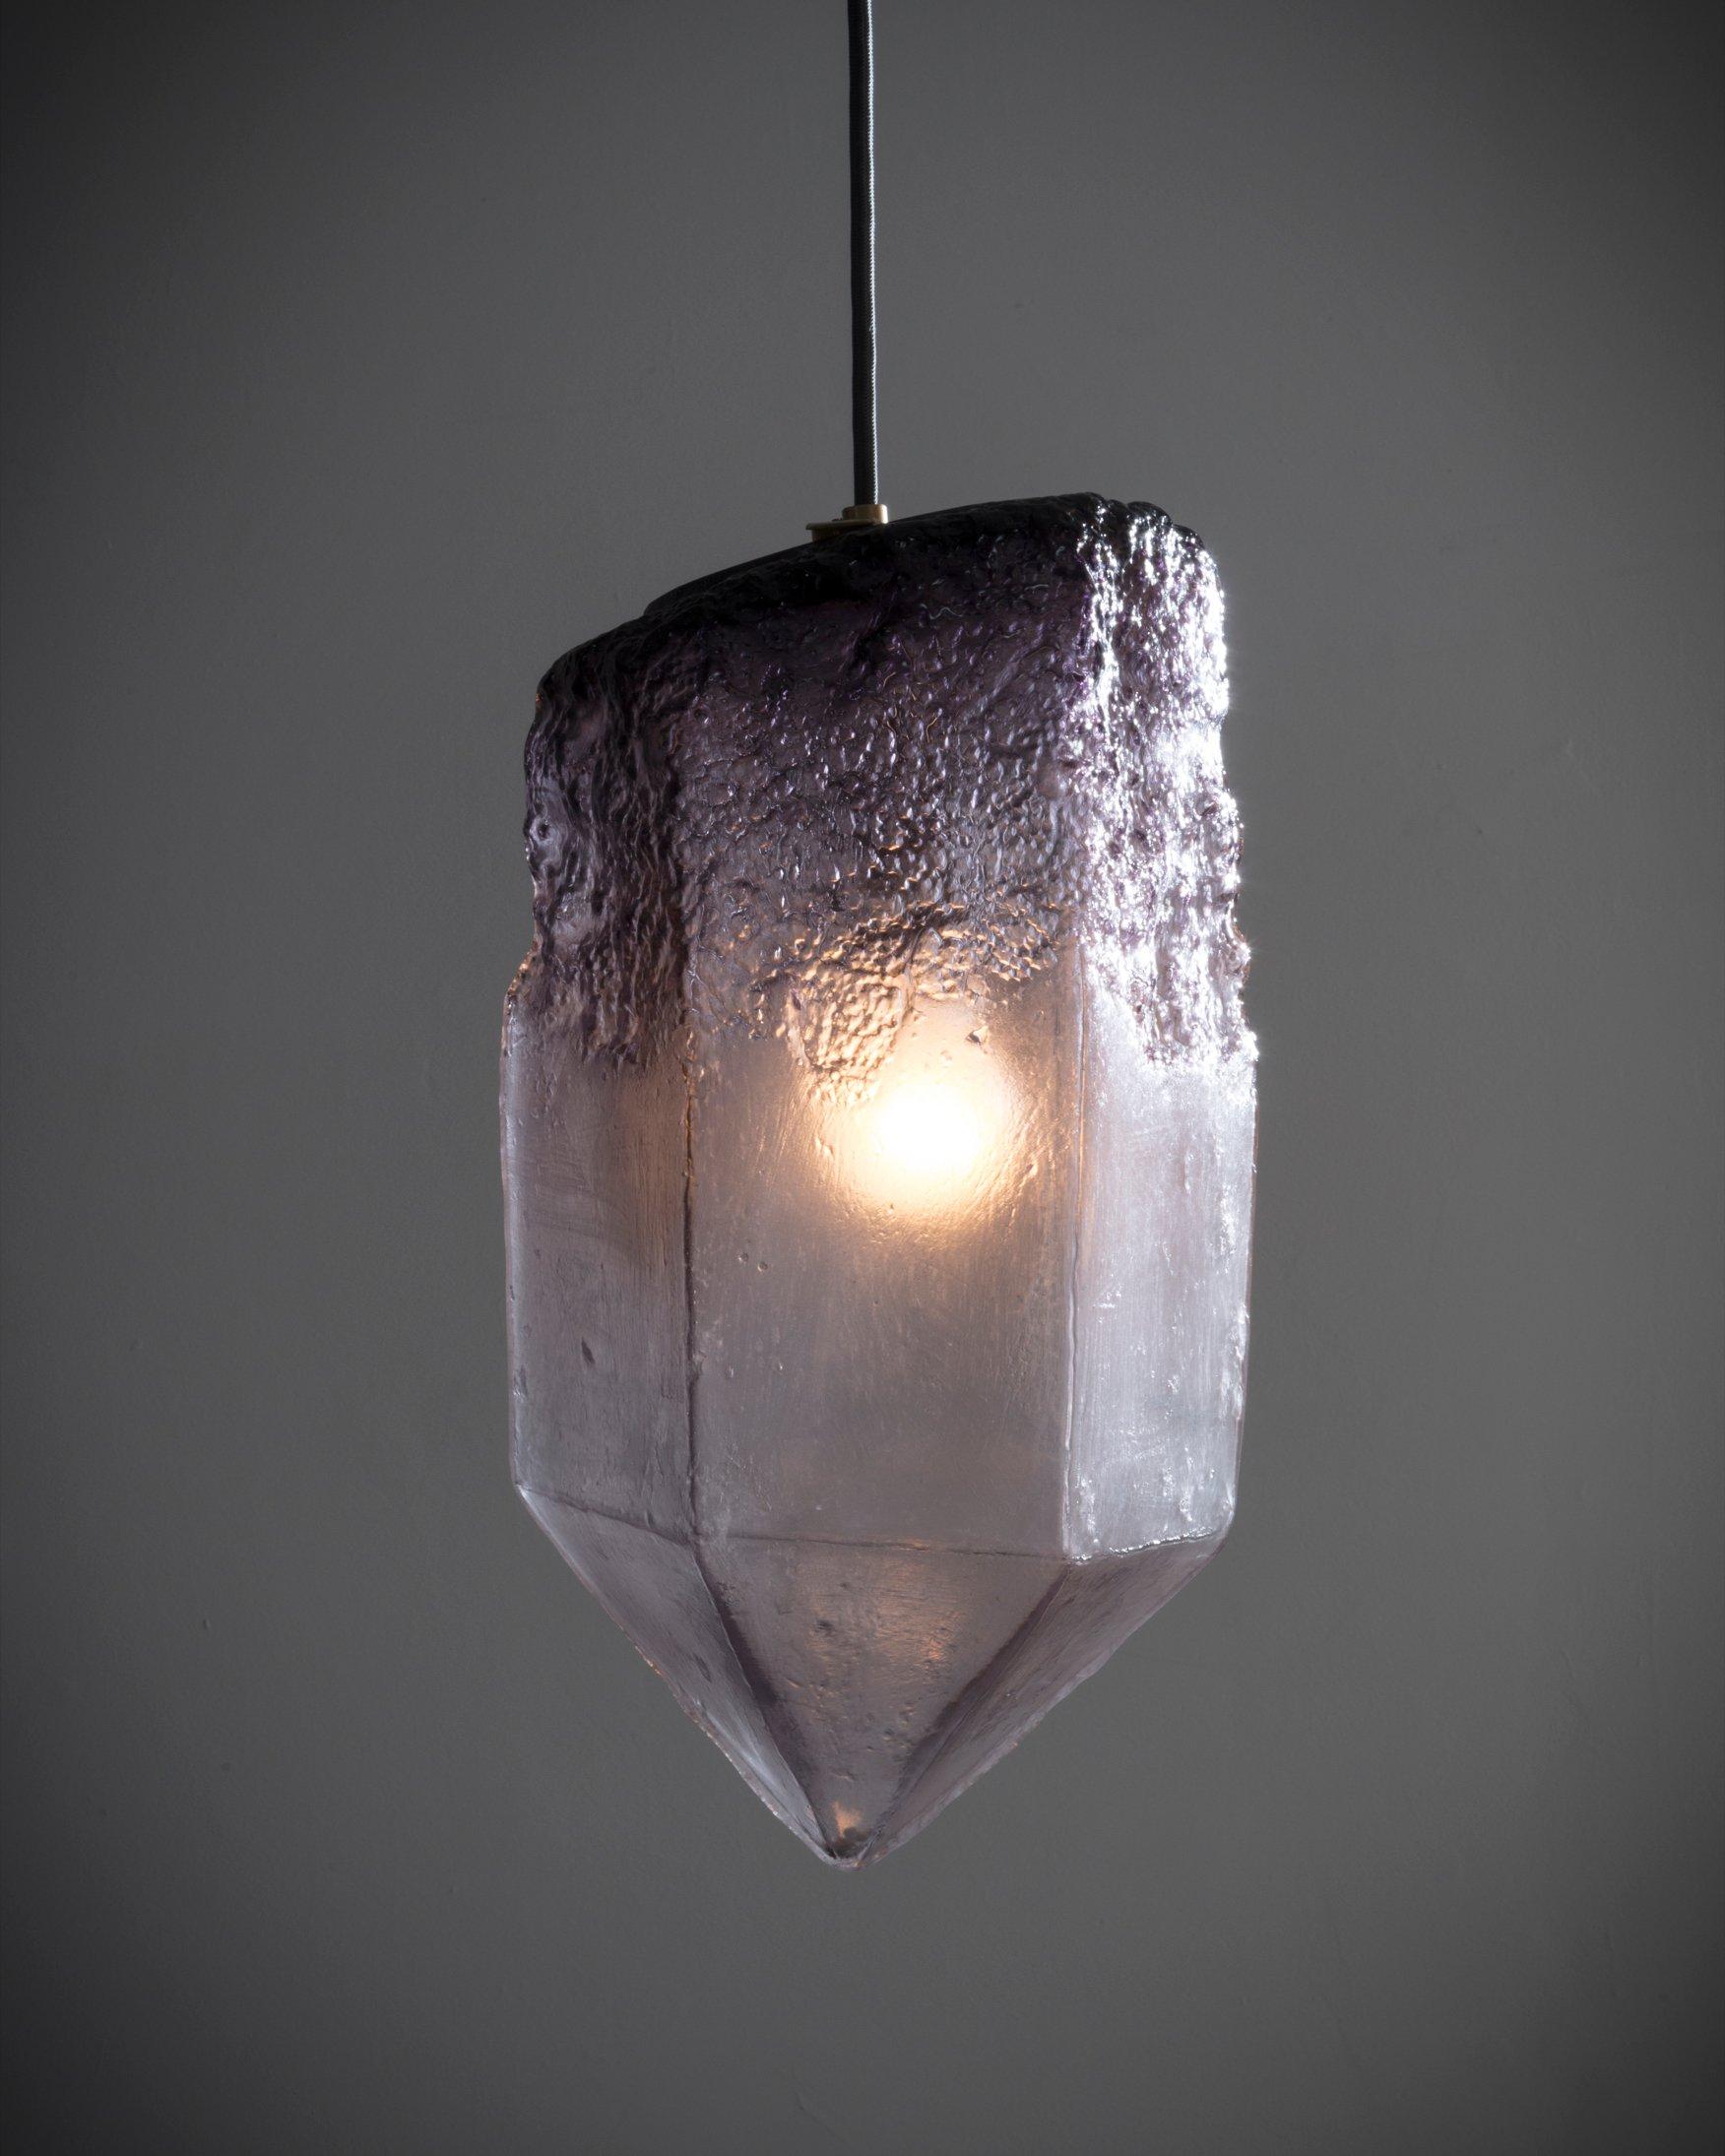 Crystal illuminated sculptural pendant in hand blown eggplant glass. Designed and made by Jeff Zimmerman, USA, 2016.

Limited number available. Please note that each item may differ slightly in color and shape.